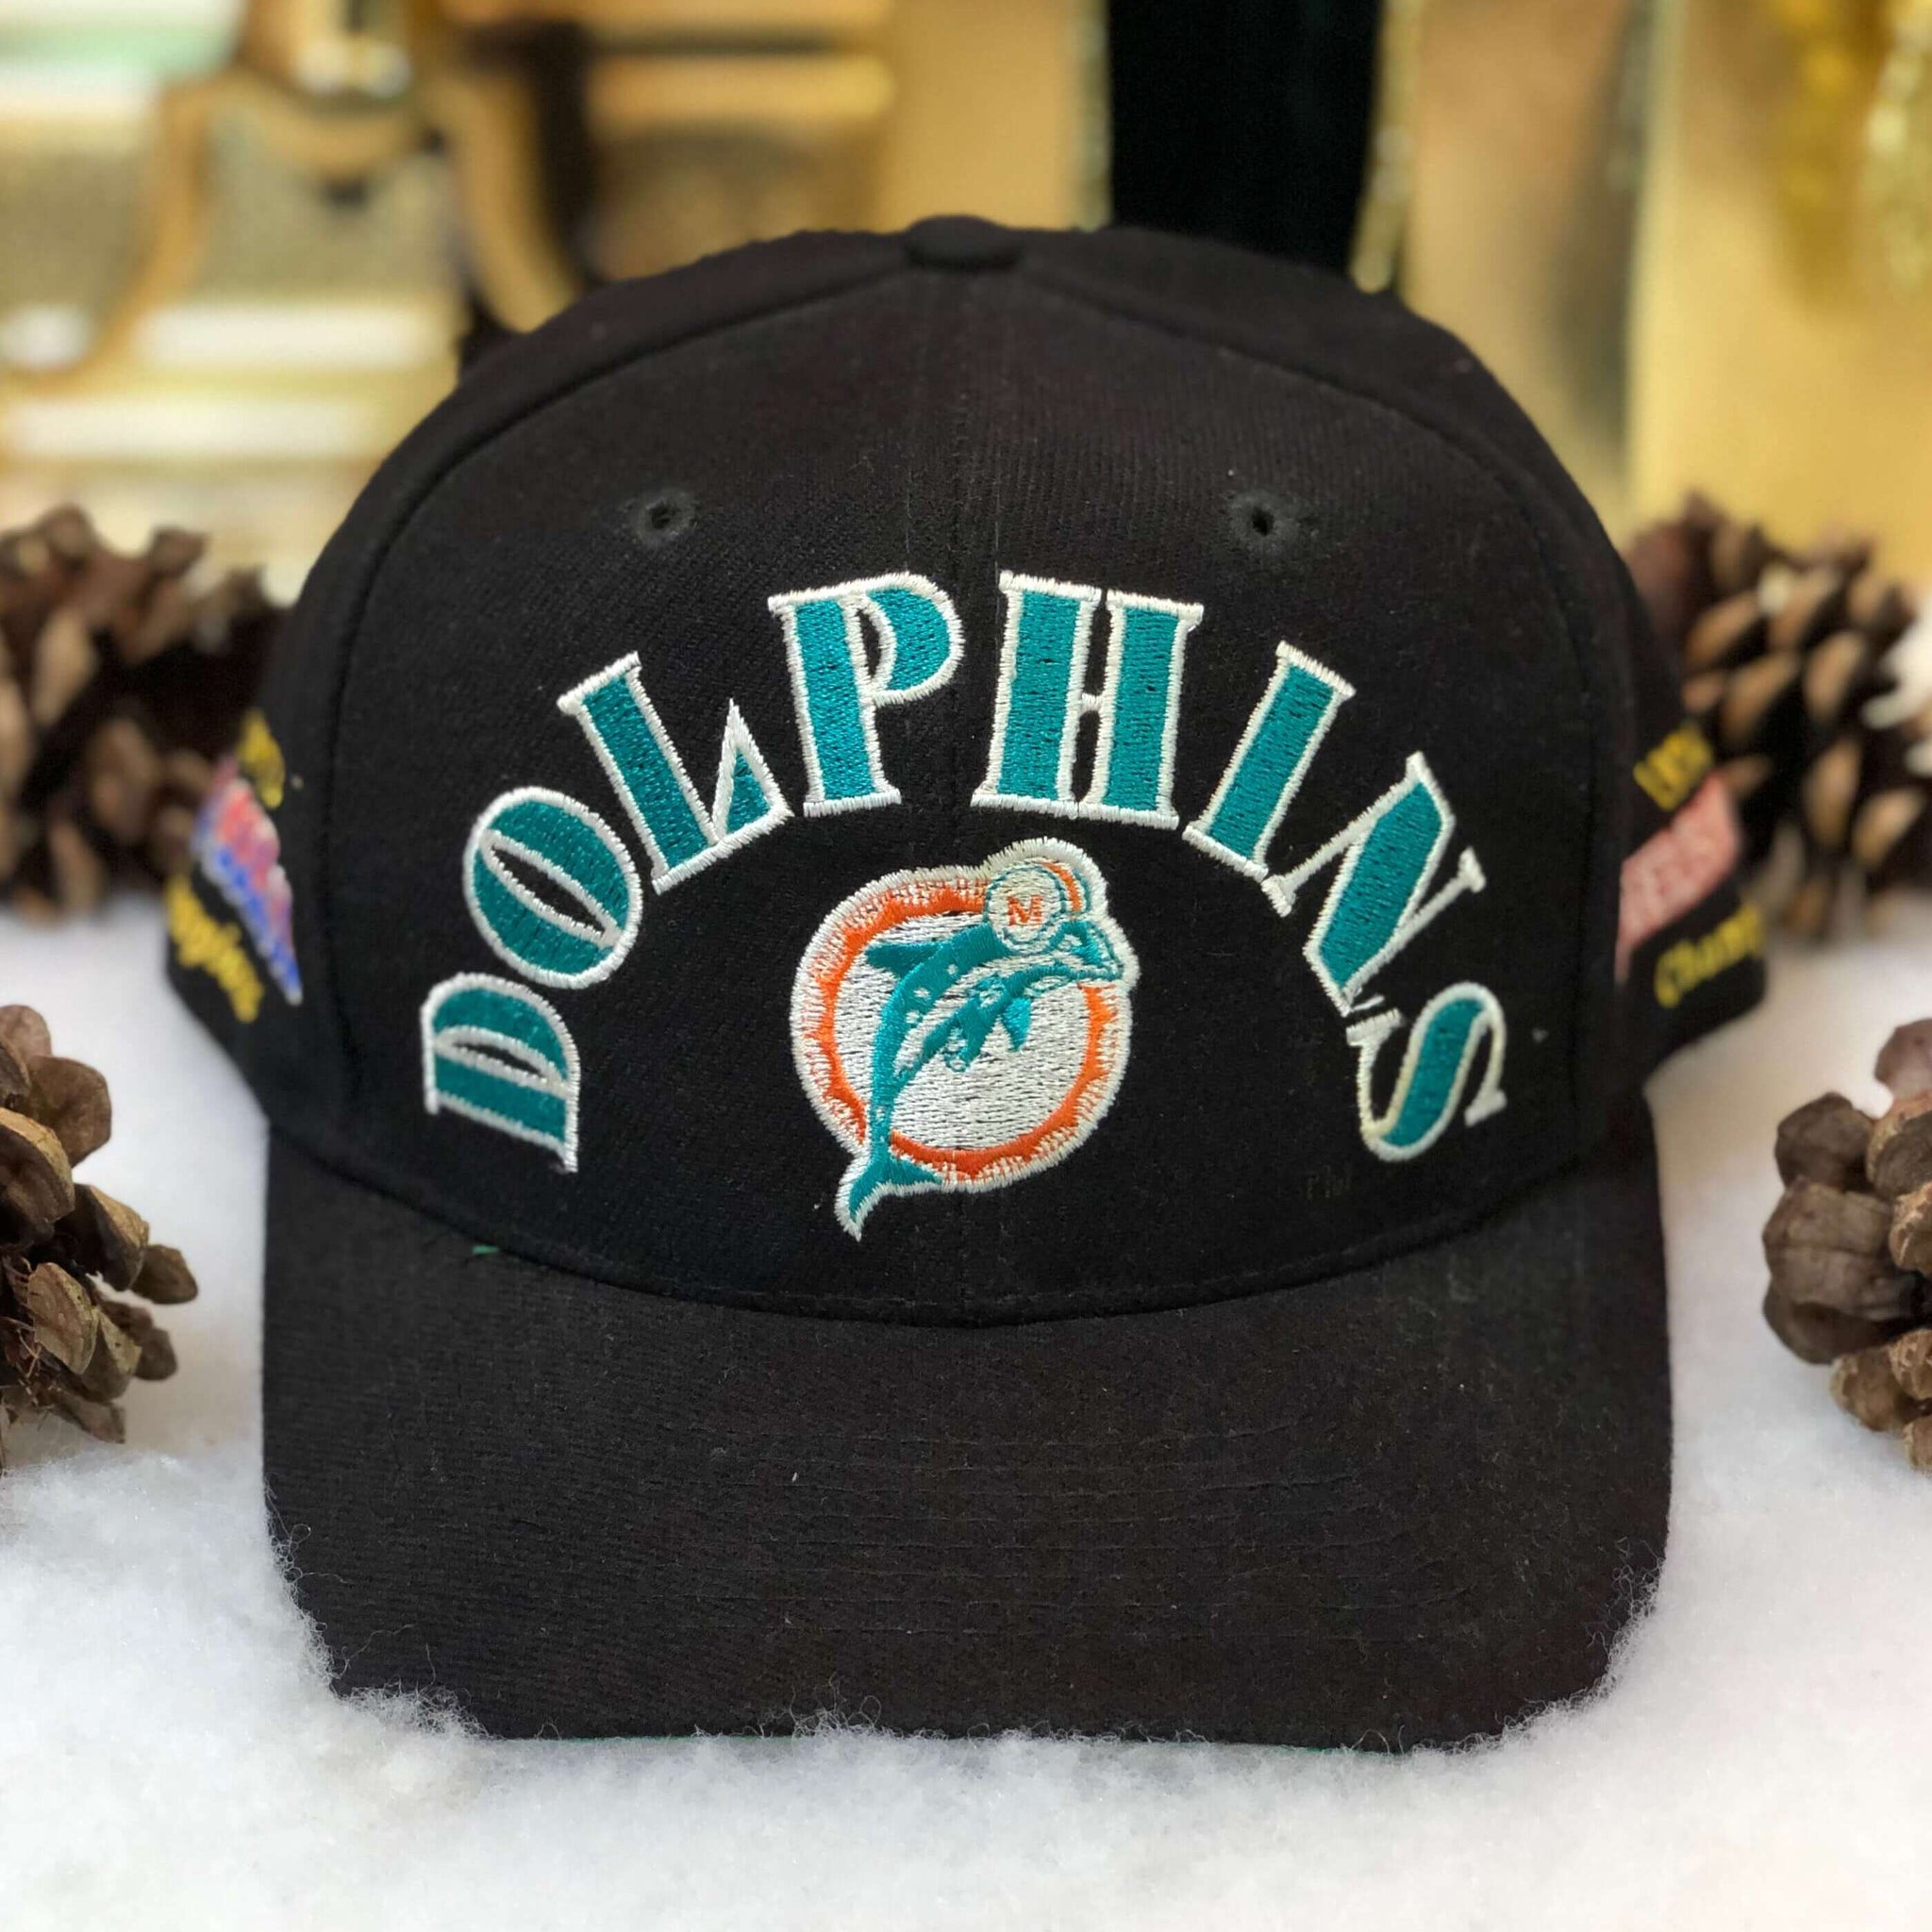 Vintage NFL Miami Dolphins Championships Annco Snapback Hat